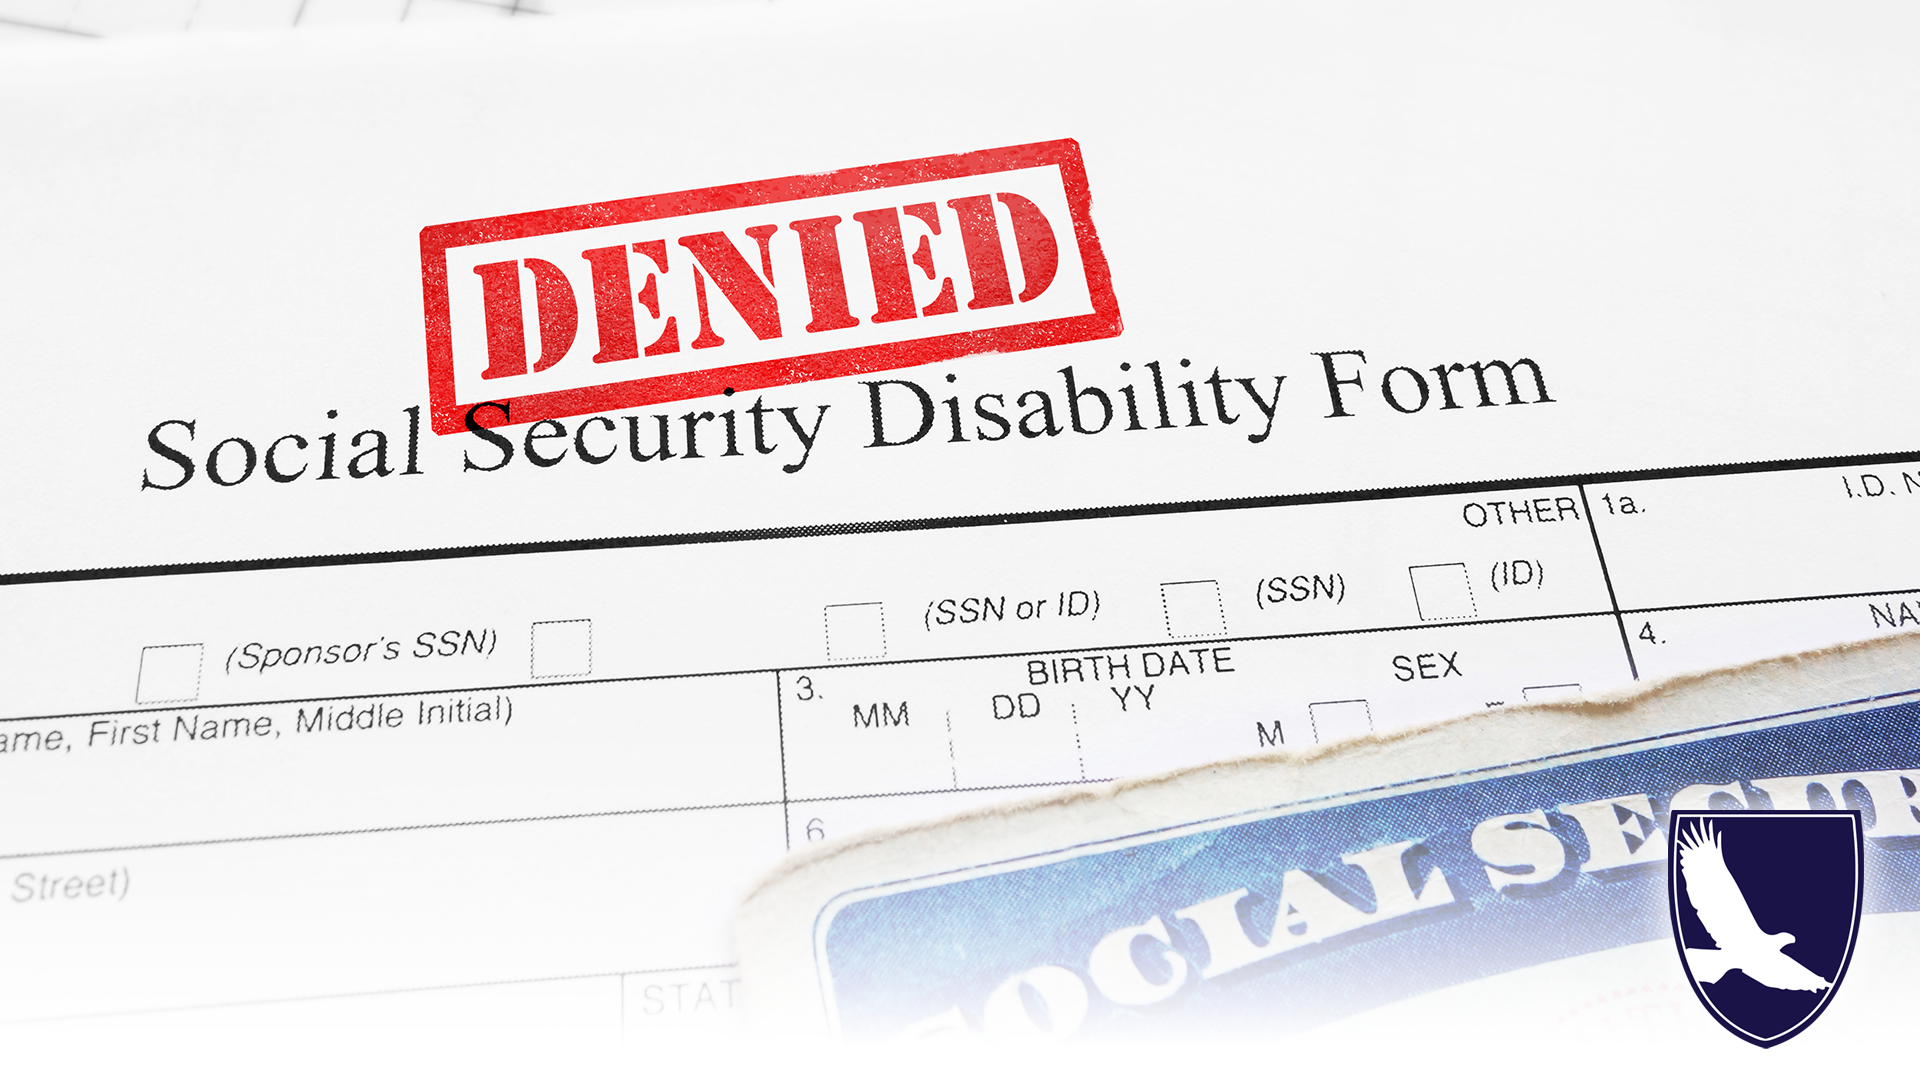 SSA Disability Claim Form. Stamped with DENIED in red ink